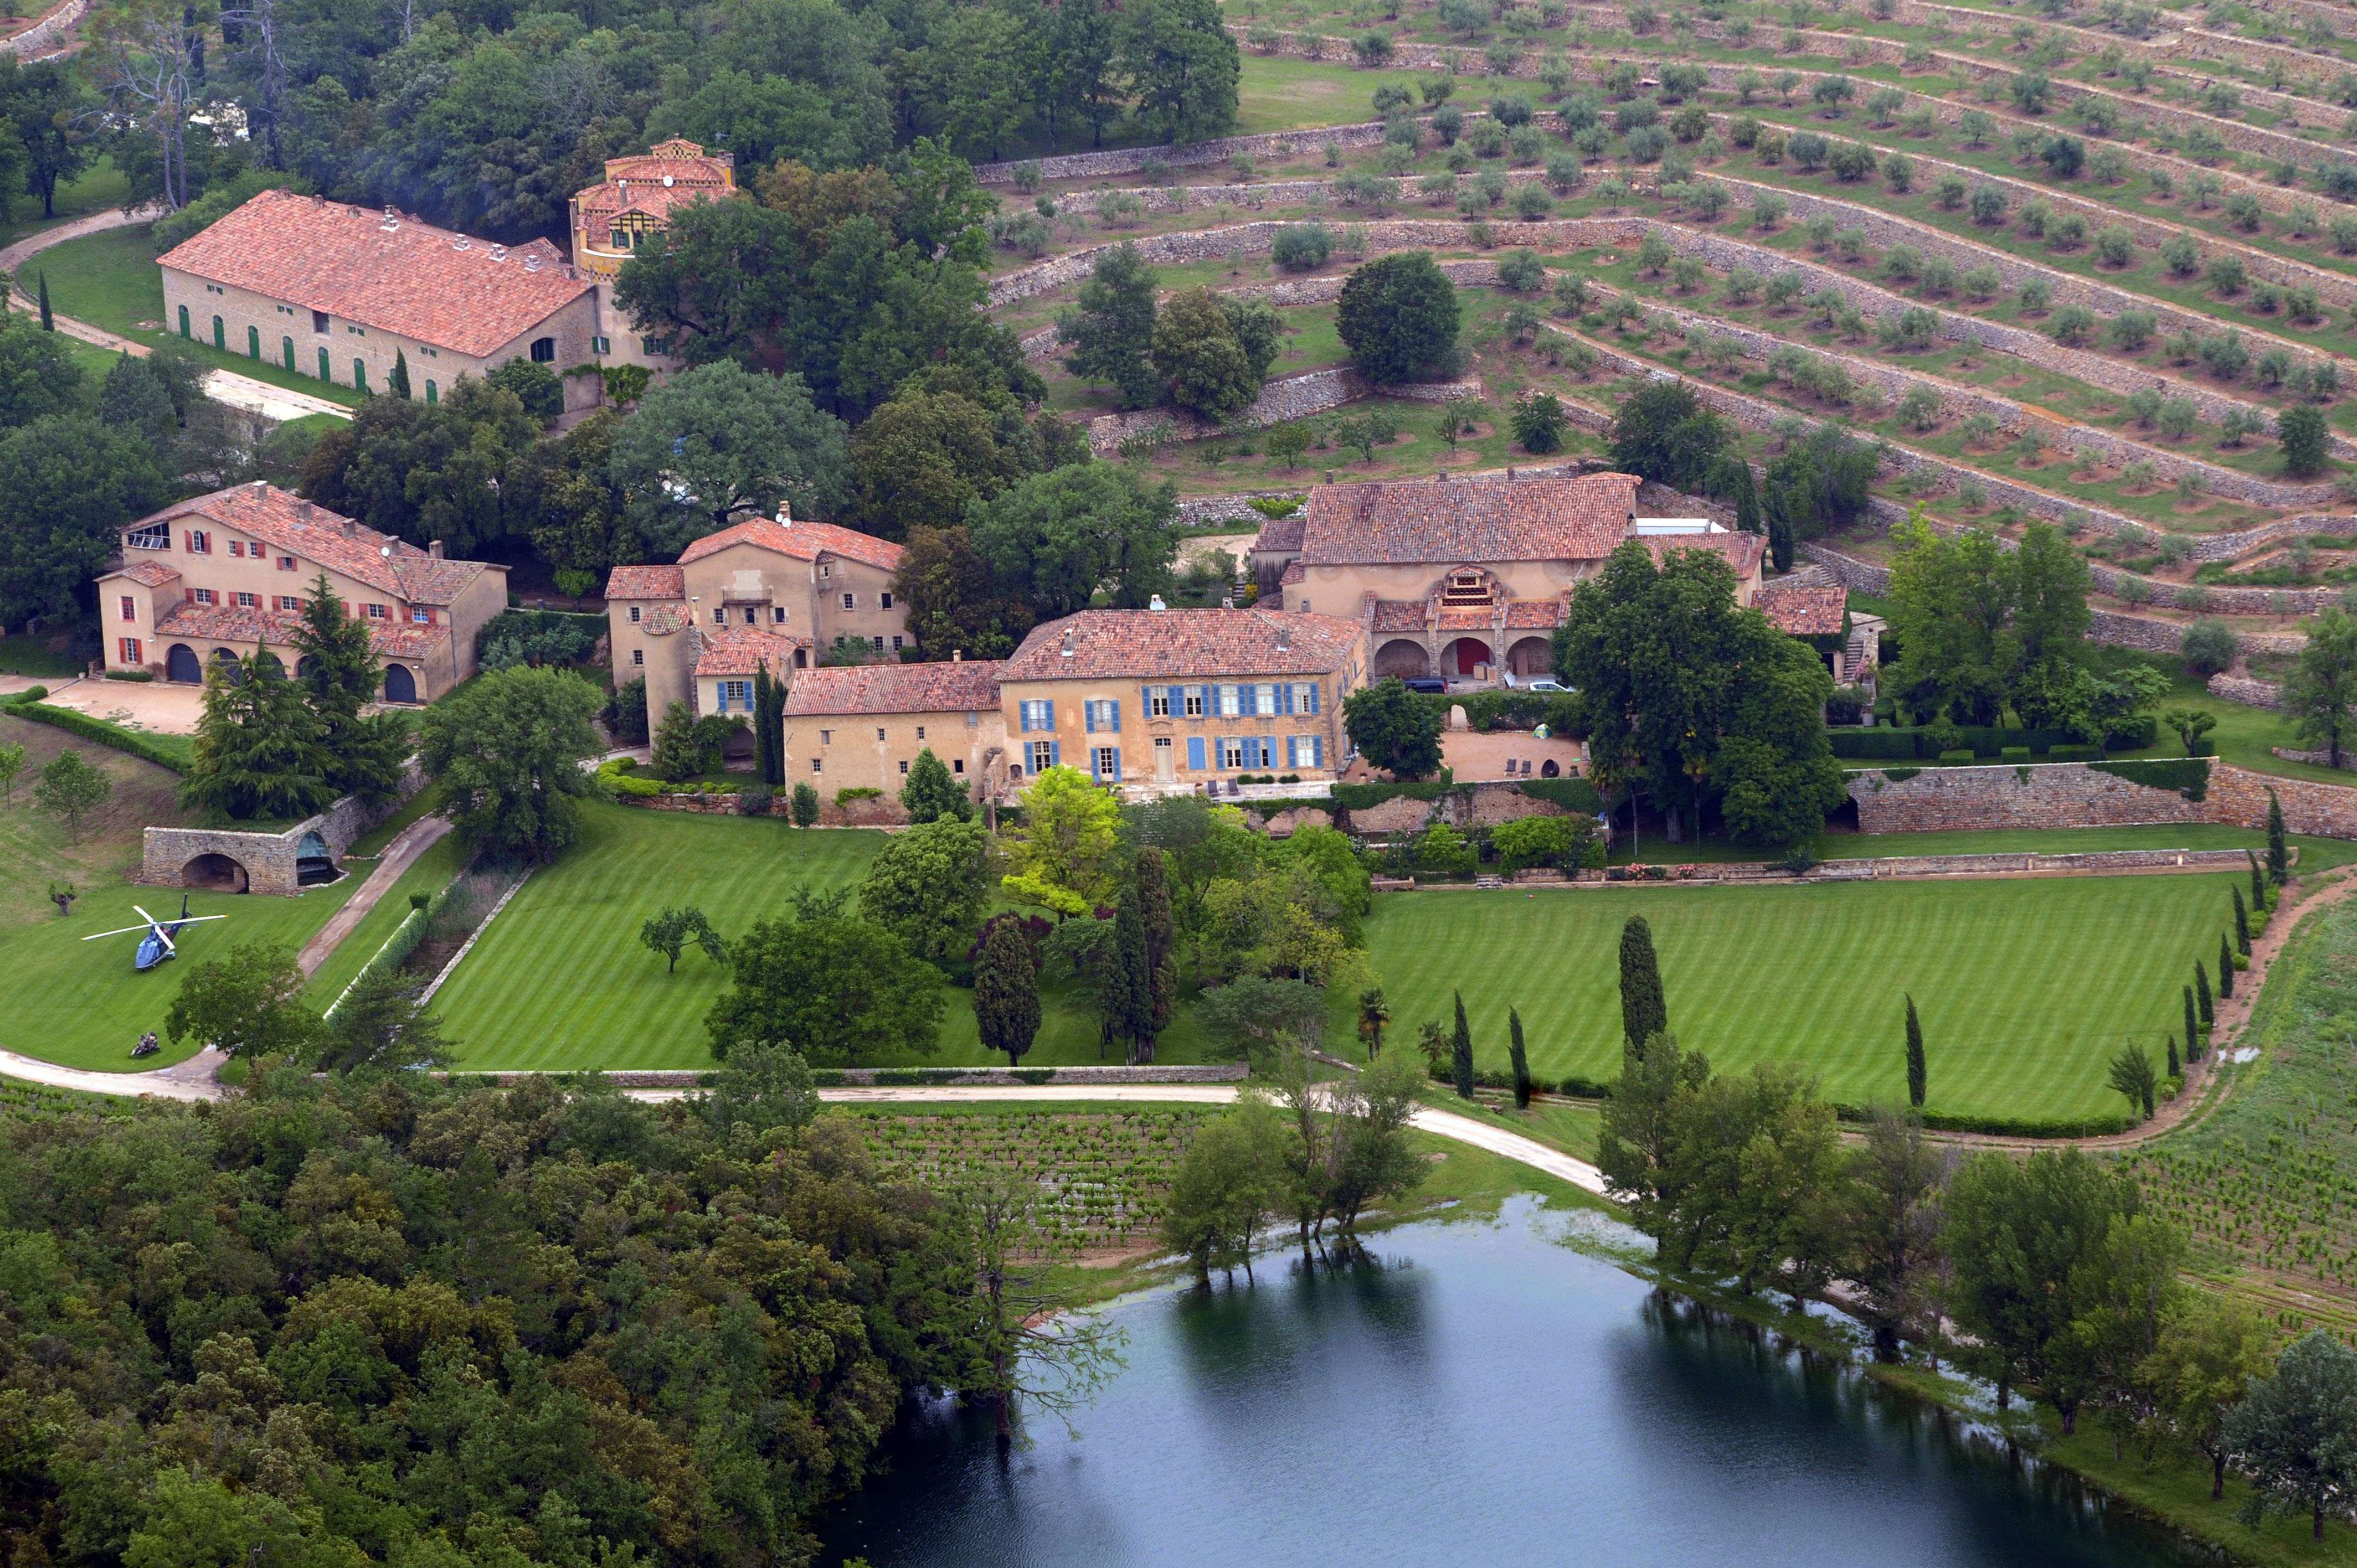 The Chateau Miraval, a vineyard estate owned by US actors Brad Pitt and Angelina Jolie in Le Val, southeastern France on May 31, 2008.